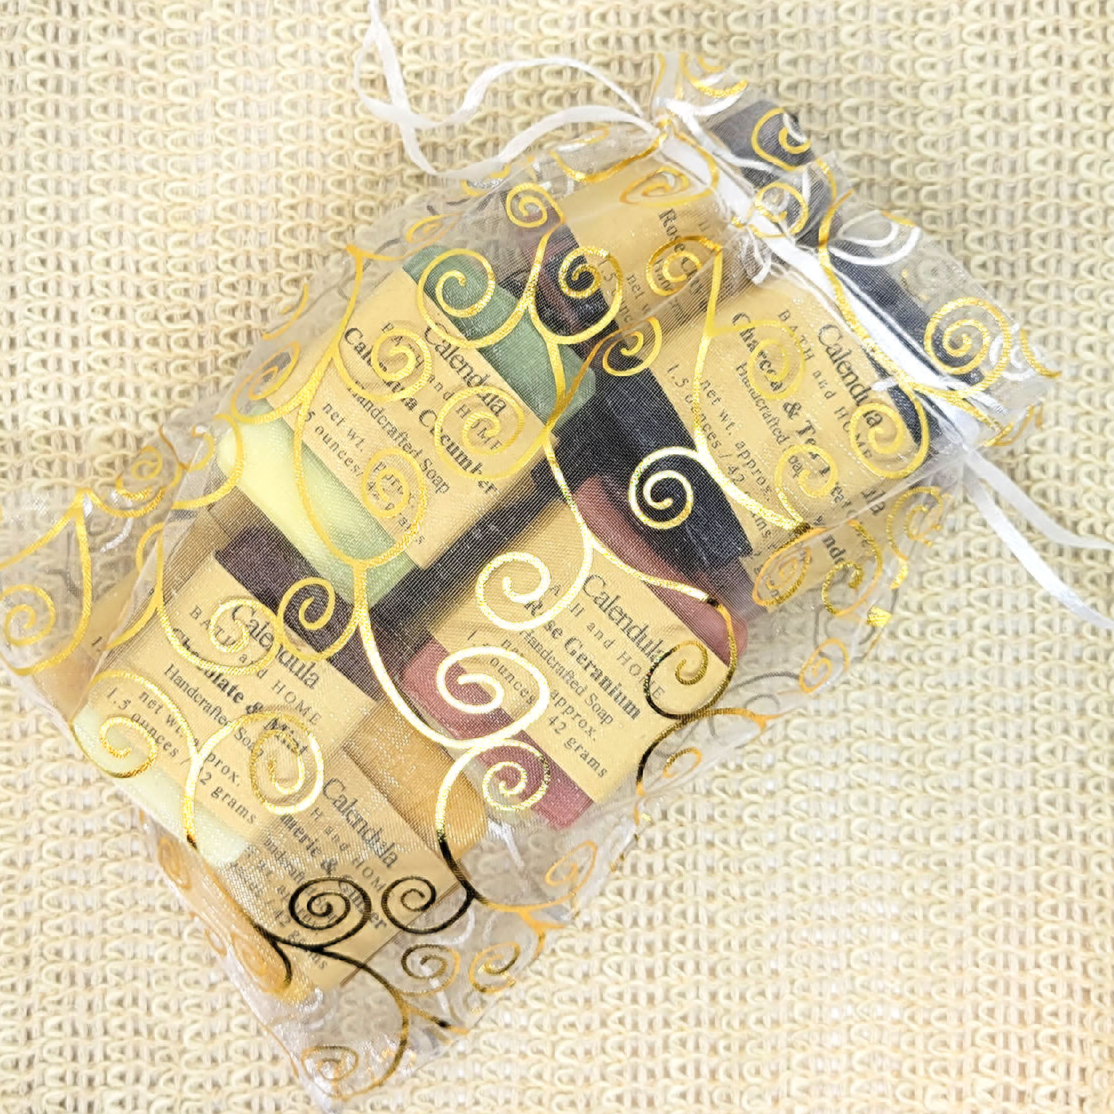 all natural travel soap gift variety pack